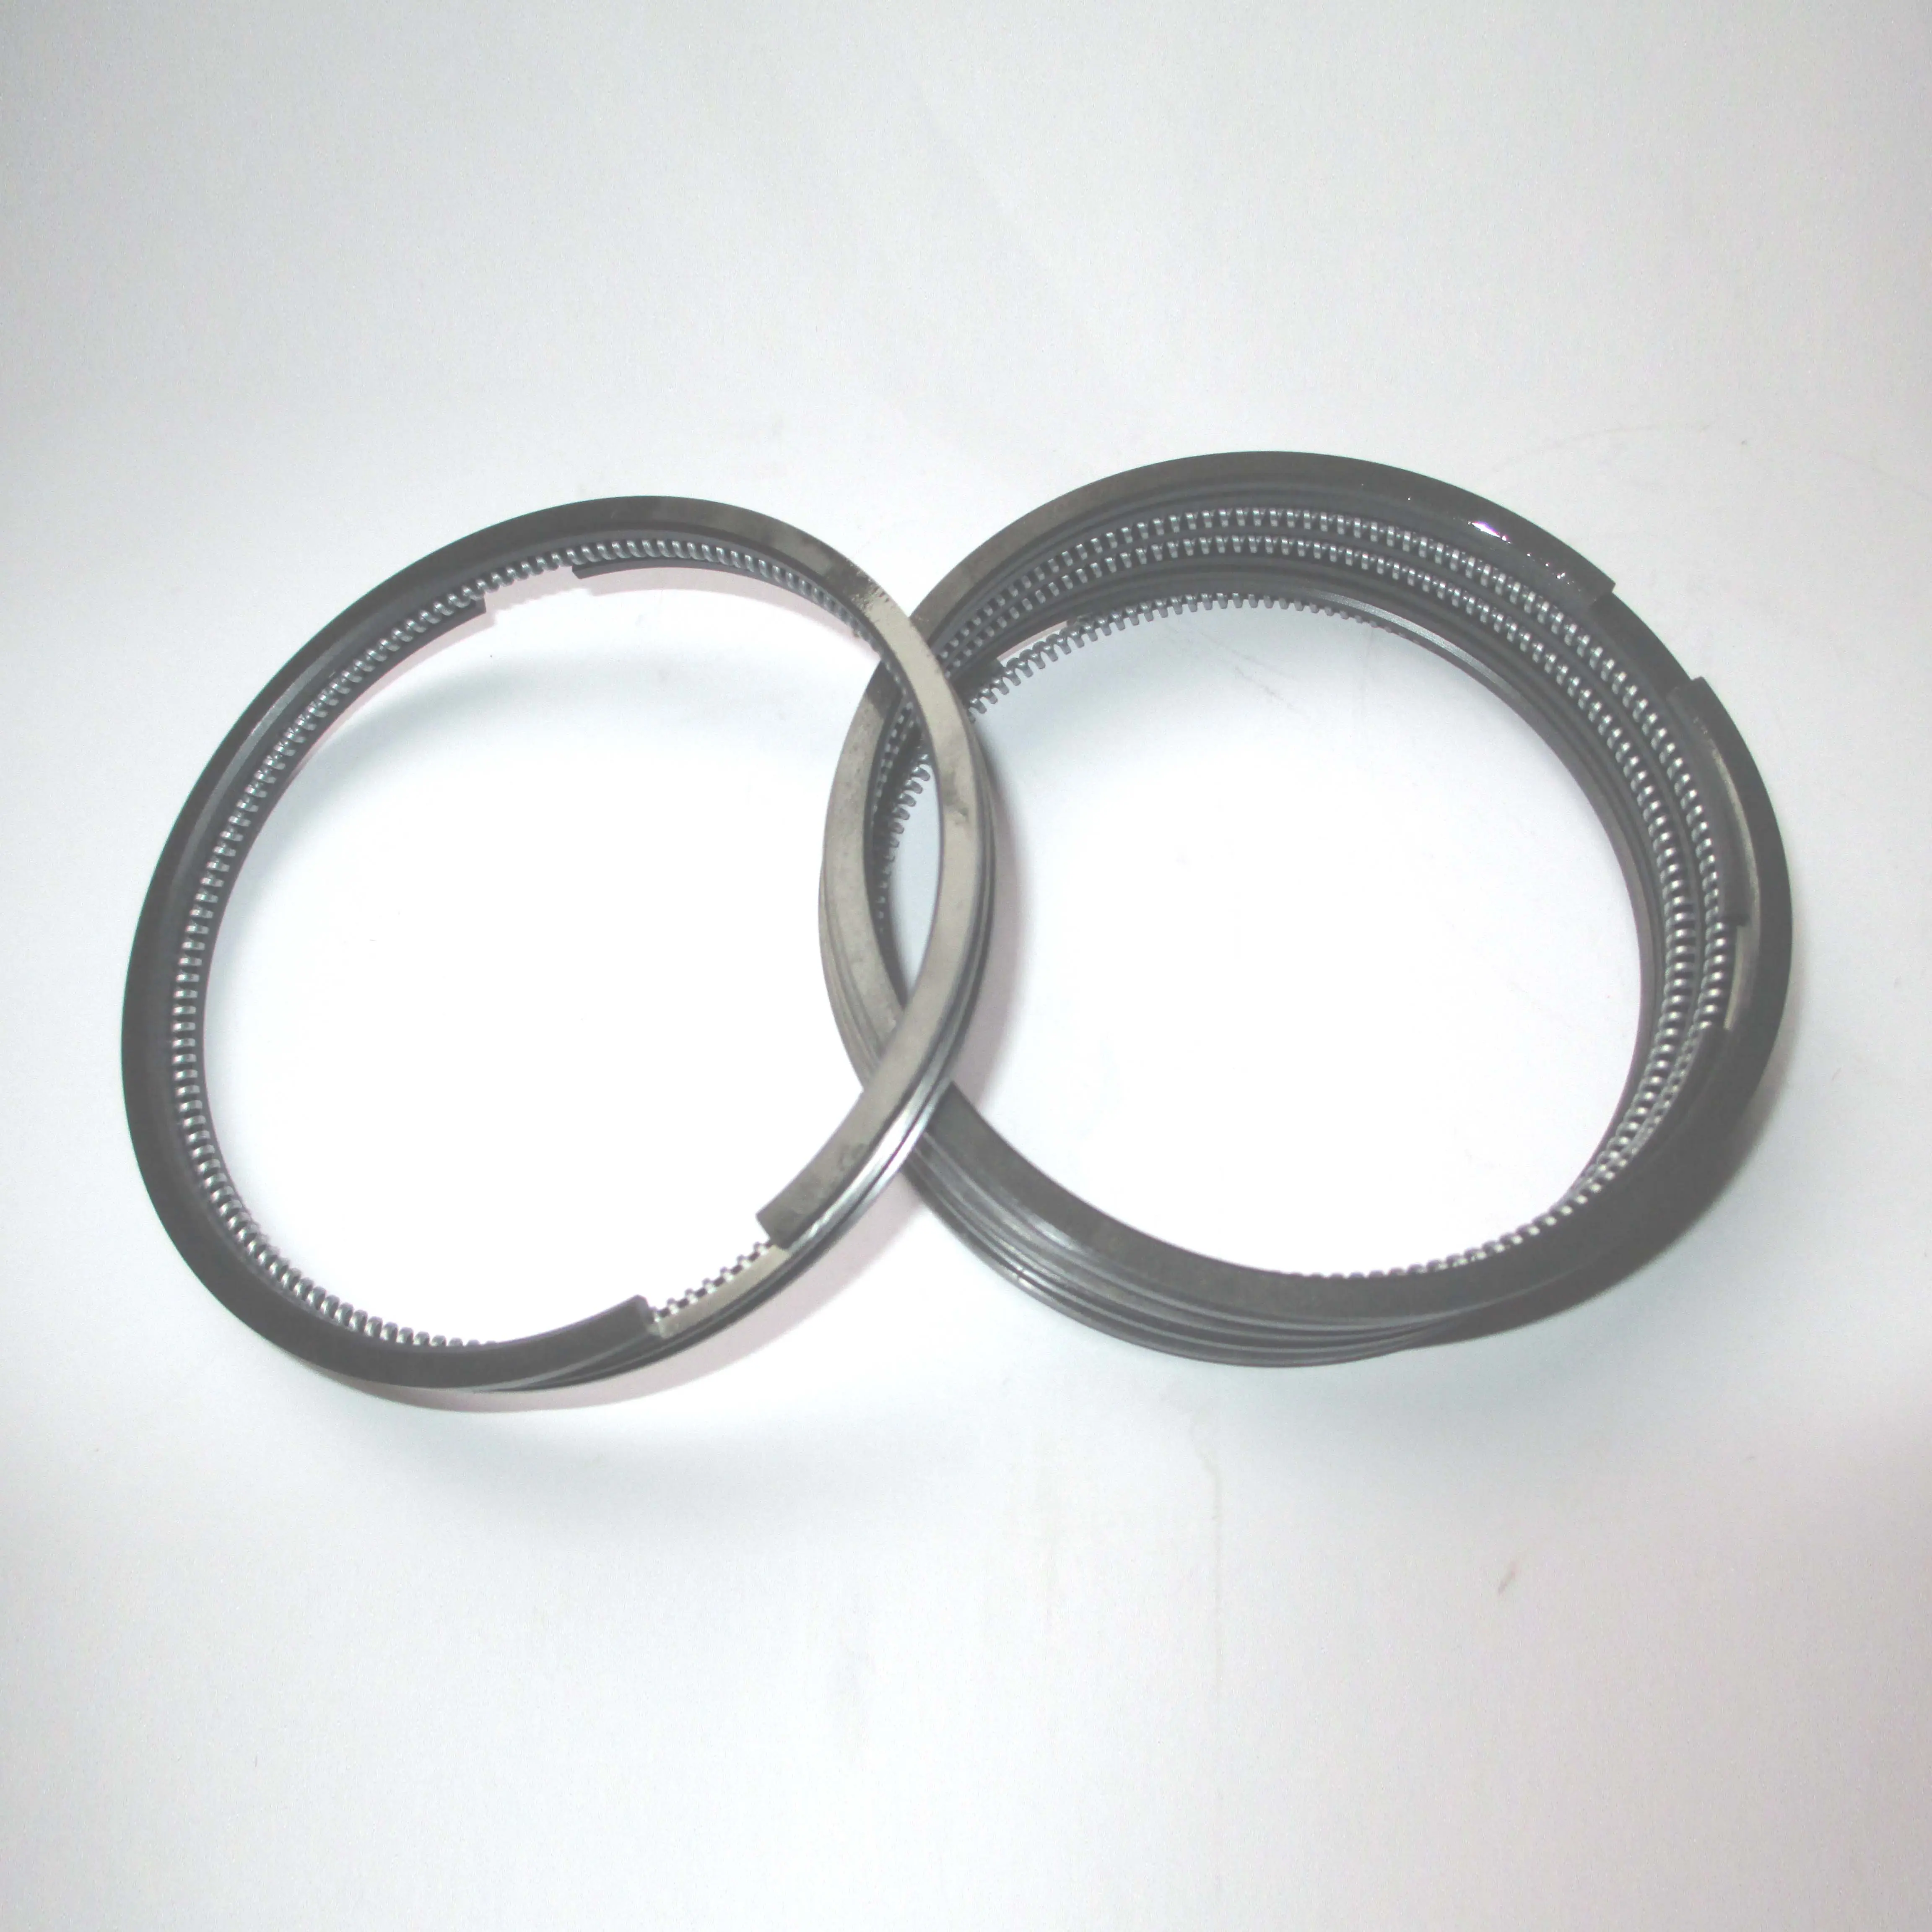 8035 8065 8060 8040 100mm 8045 Piston Ring Set for FIAT-IVECO 8030 